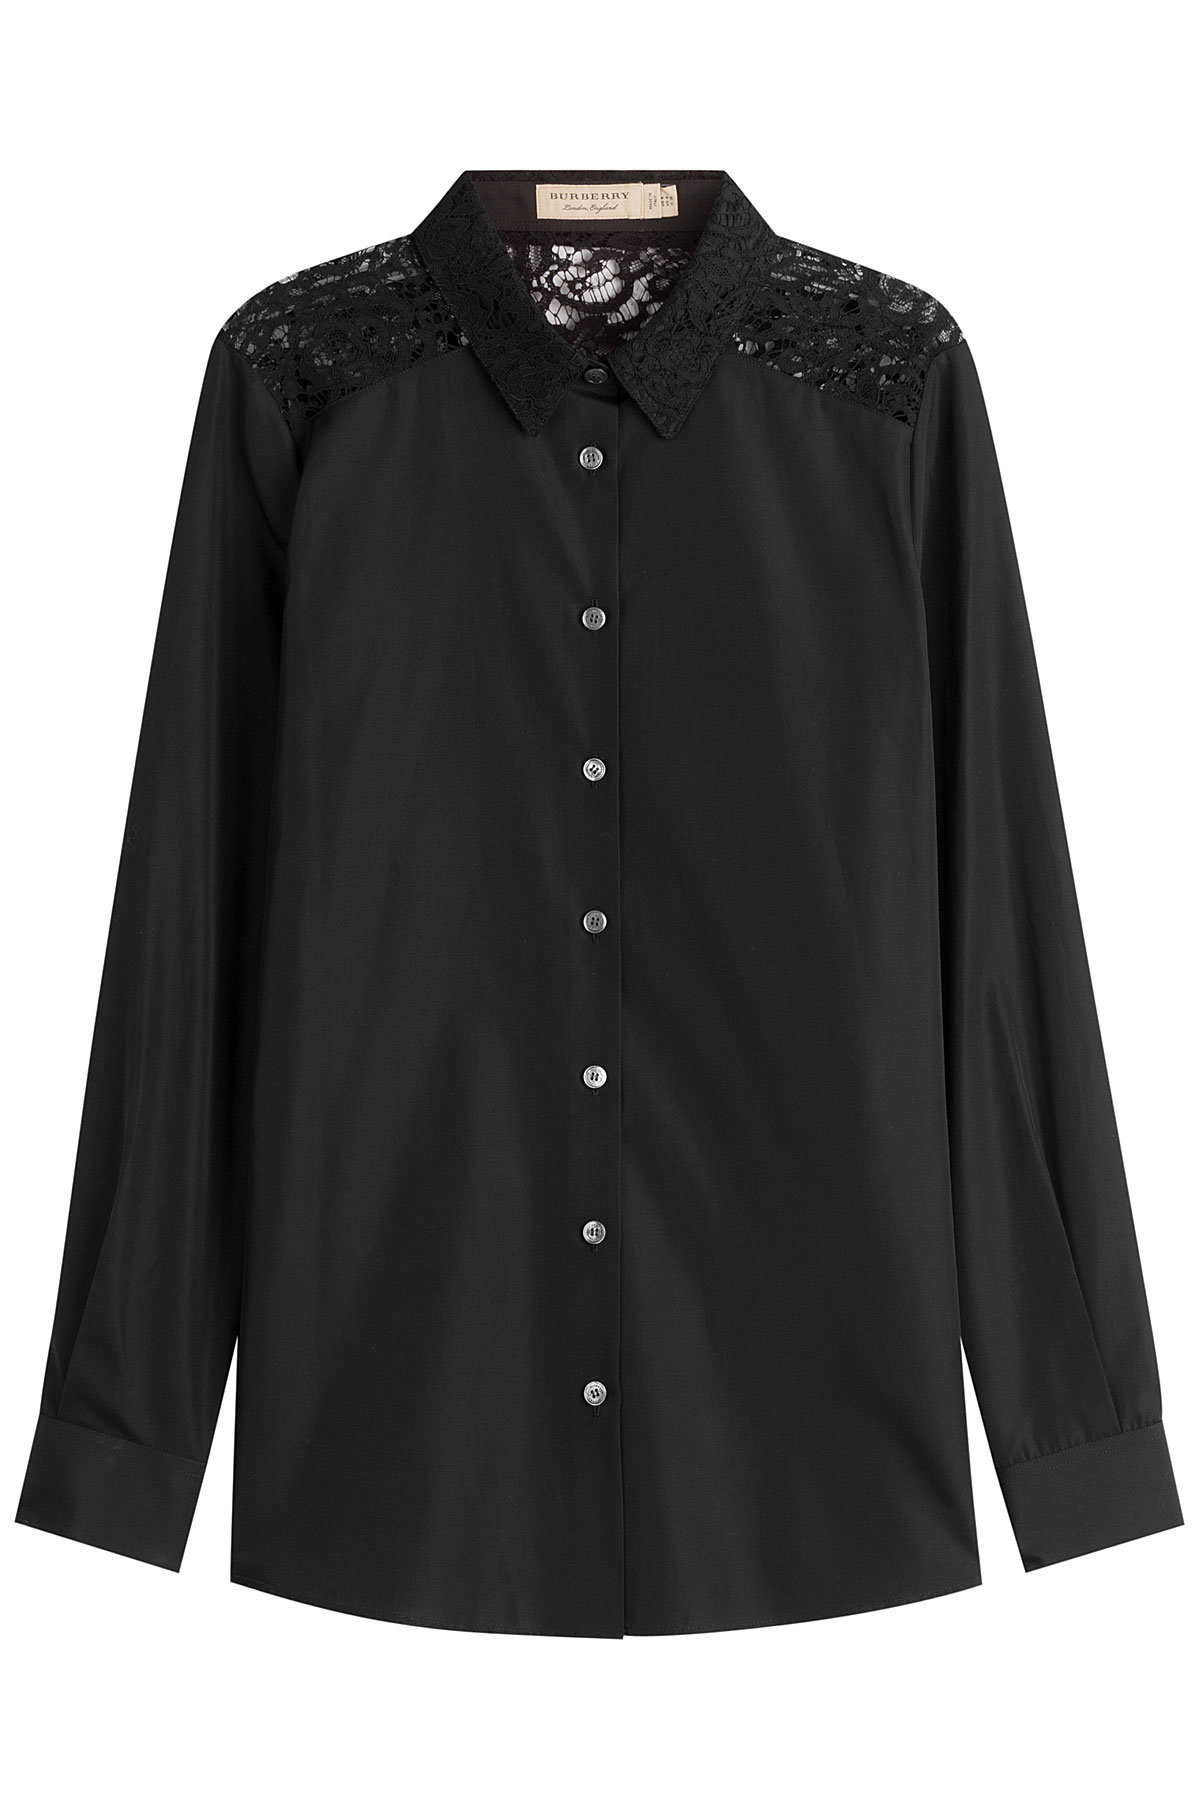 Burberry - Cotton Shirt with Lace Back